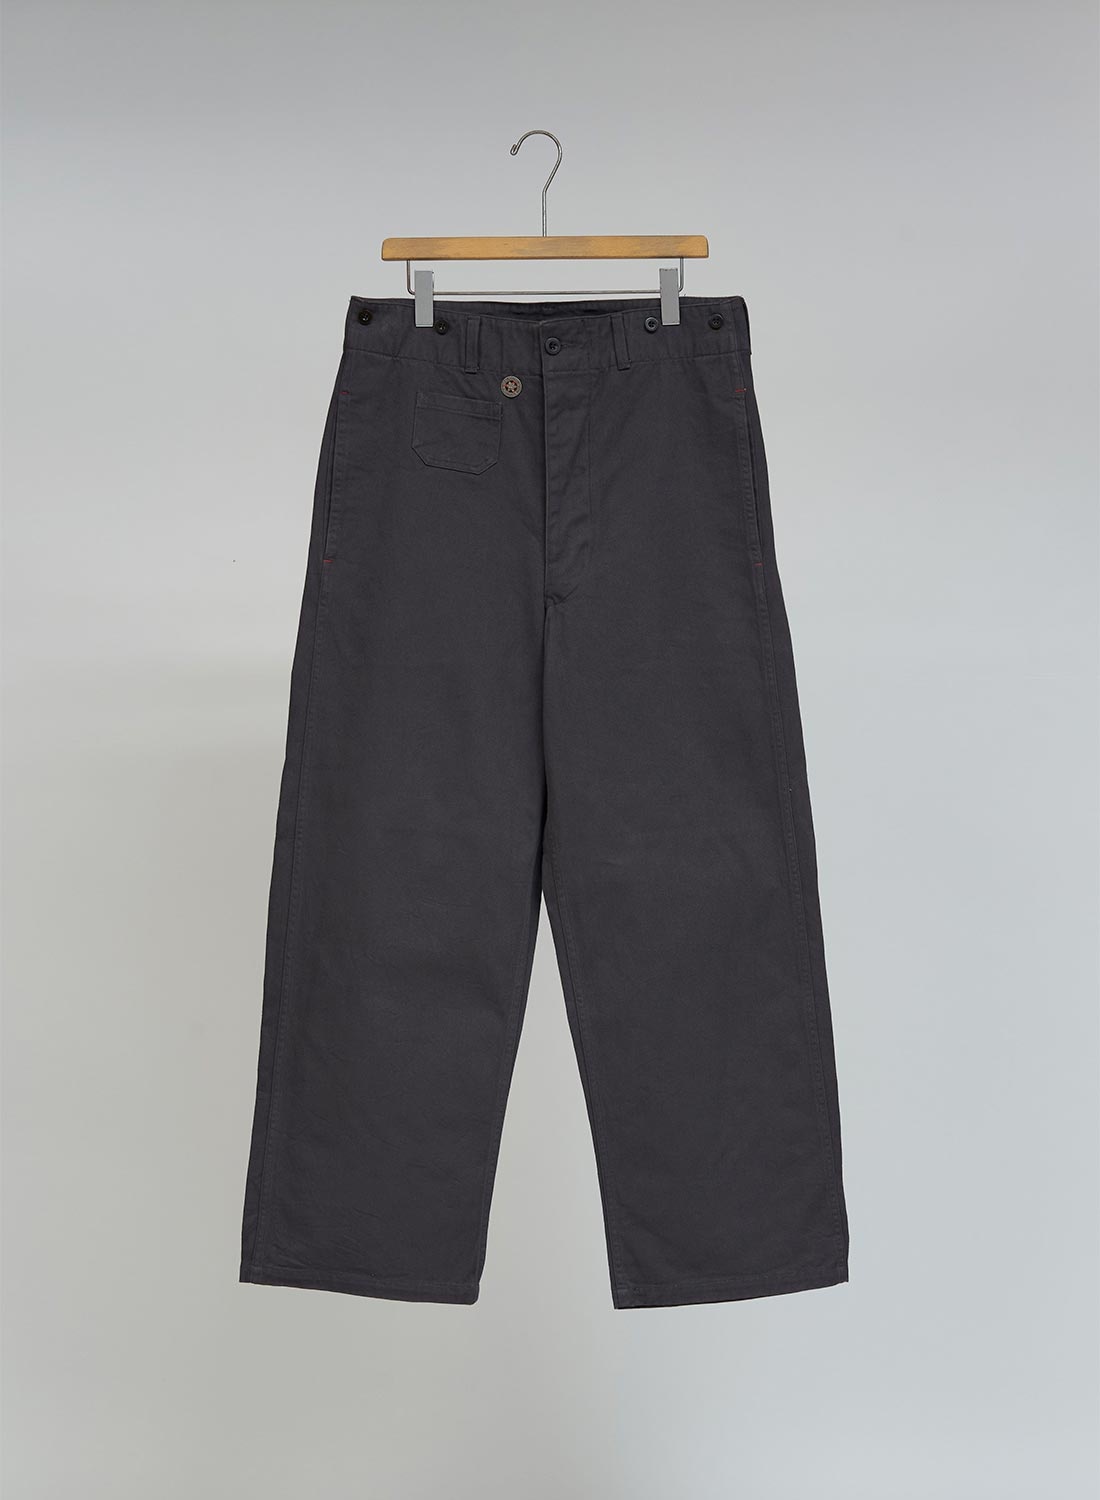 CC22 Utility Pant in Charcoal Grey - 1